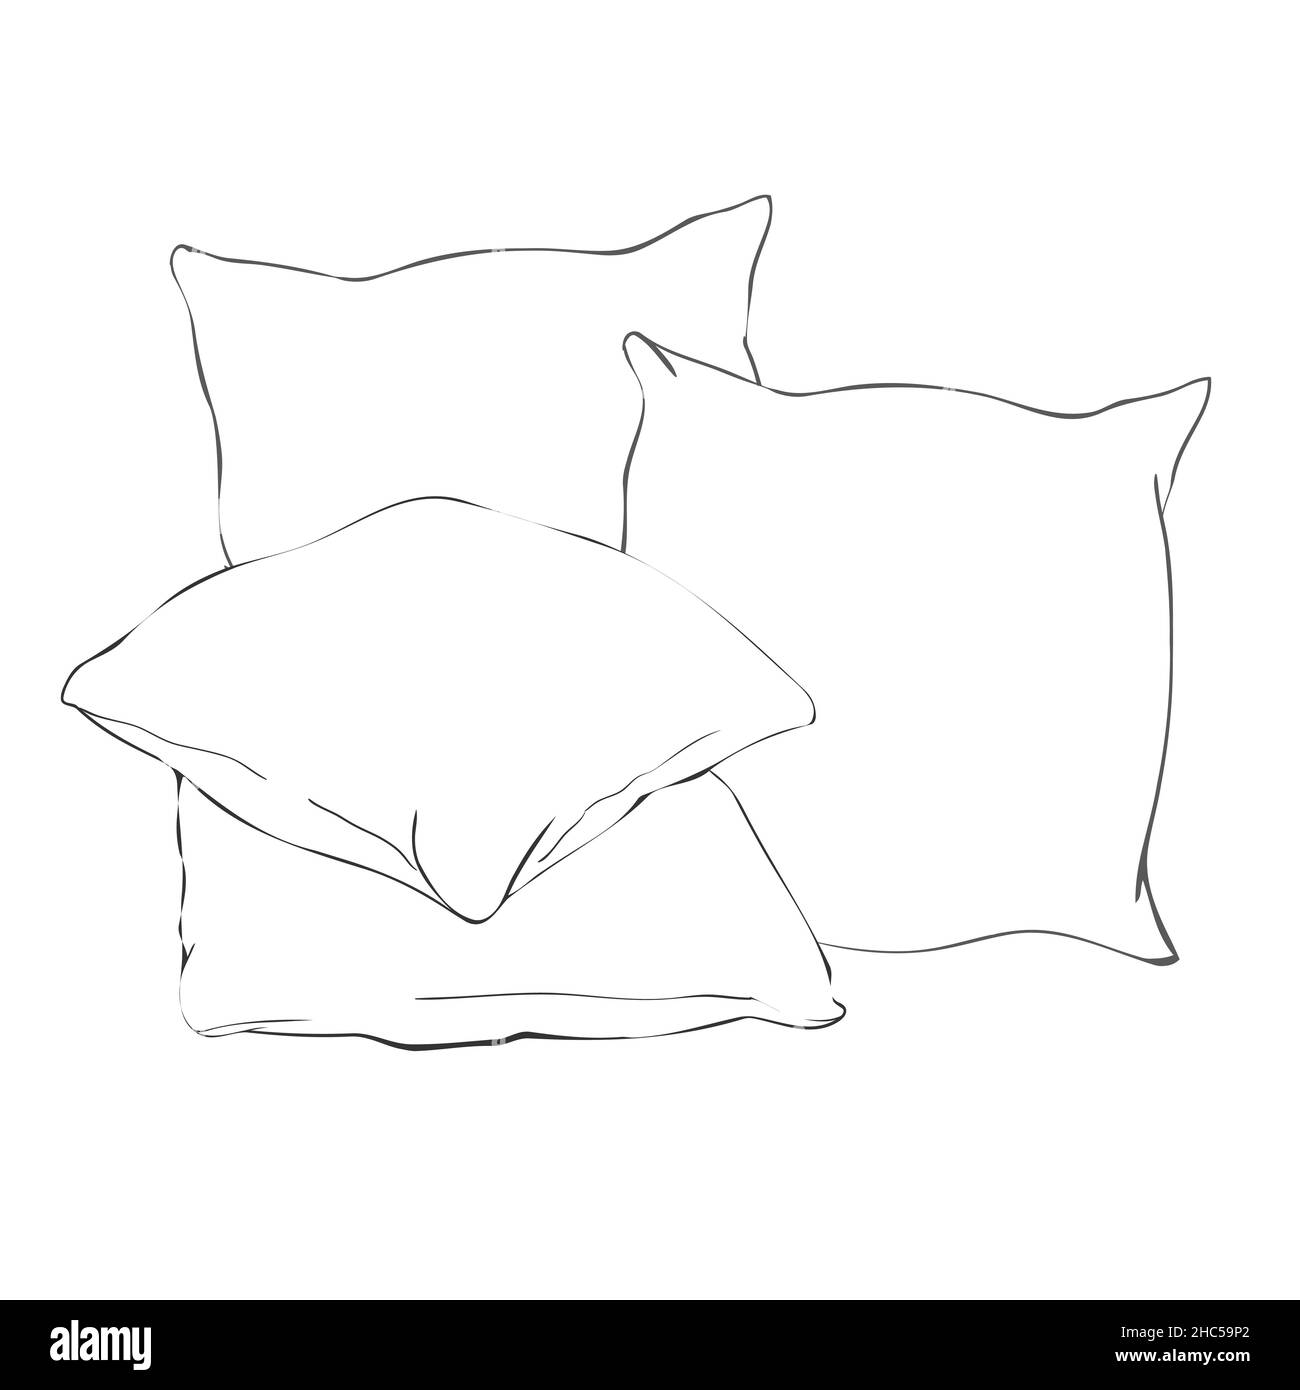 sketch vector illustration of pillow, art, pillow isolated, white pillow, bed pillow, bed, comfort, design, domestic, fabric, feather, isolated, sleep Stock Vector